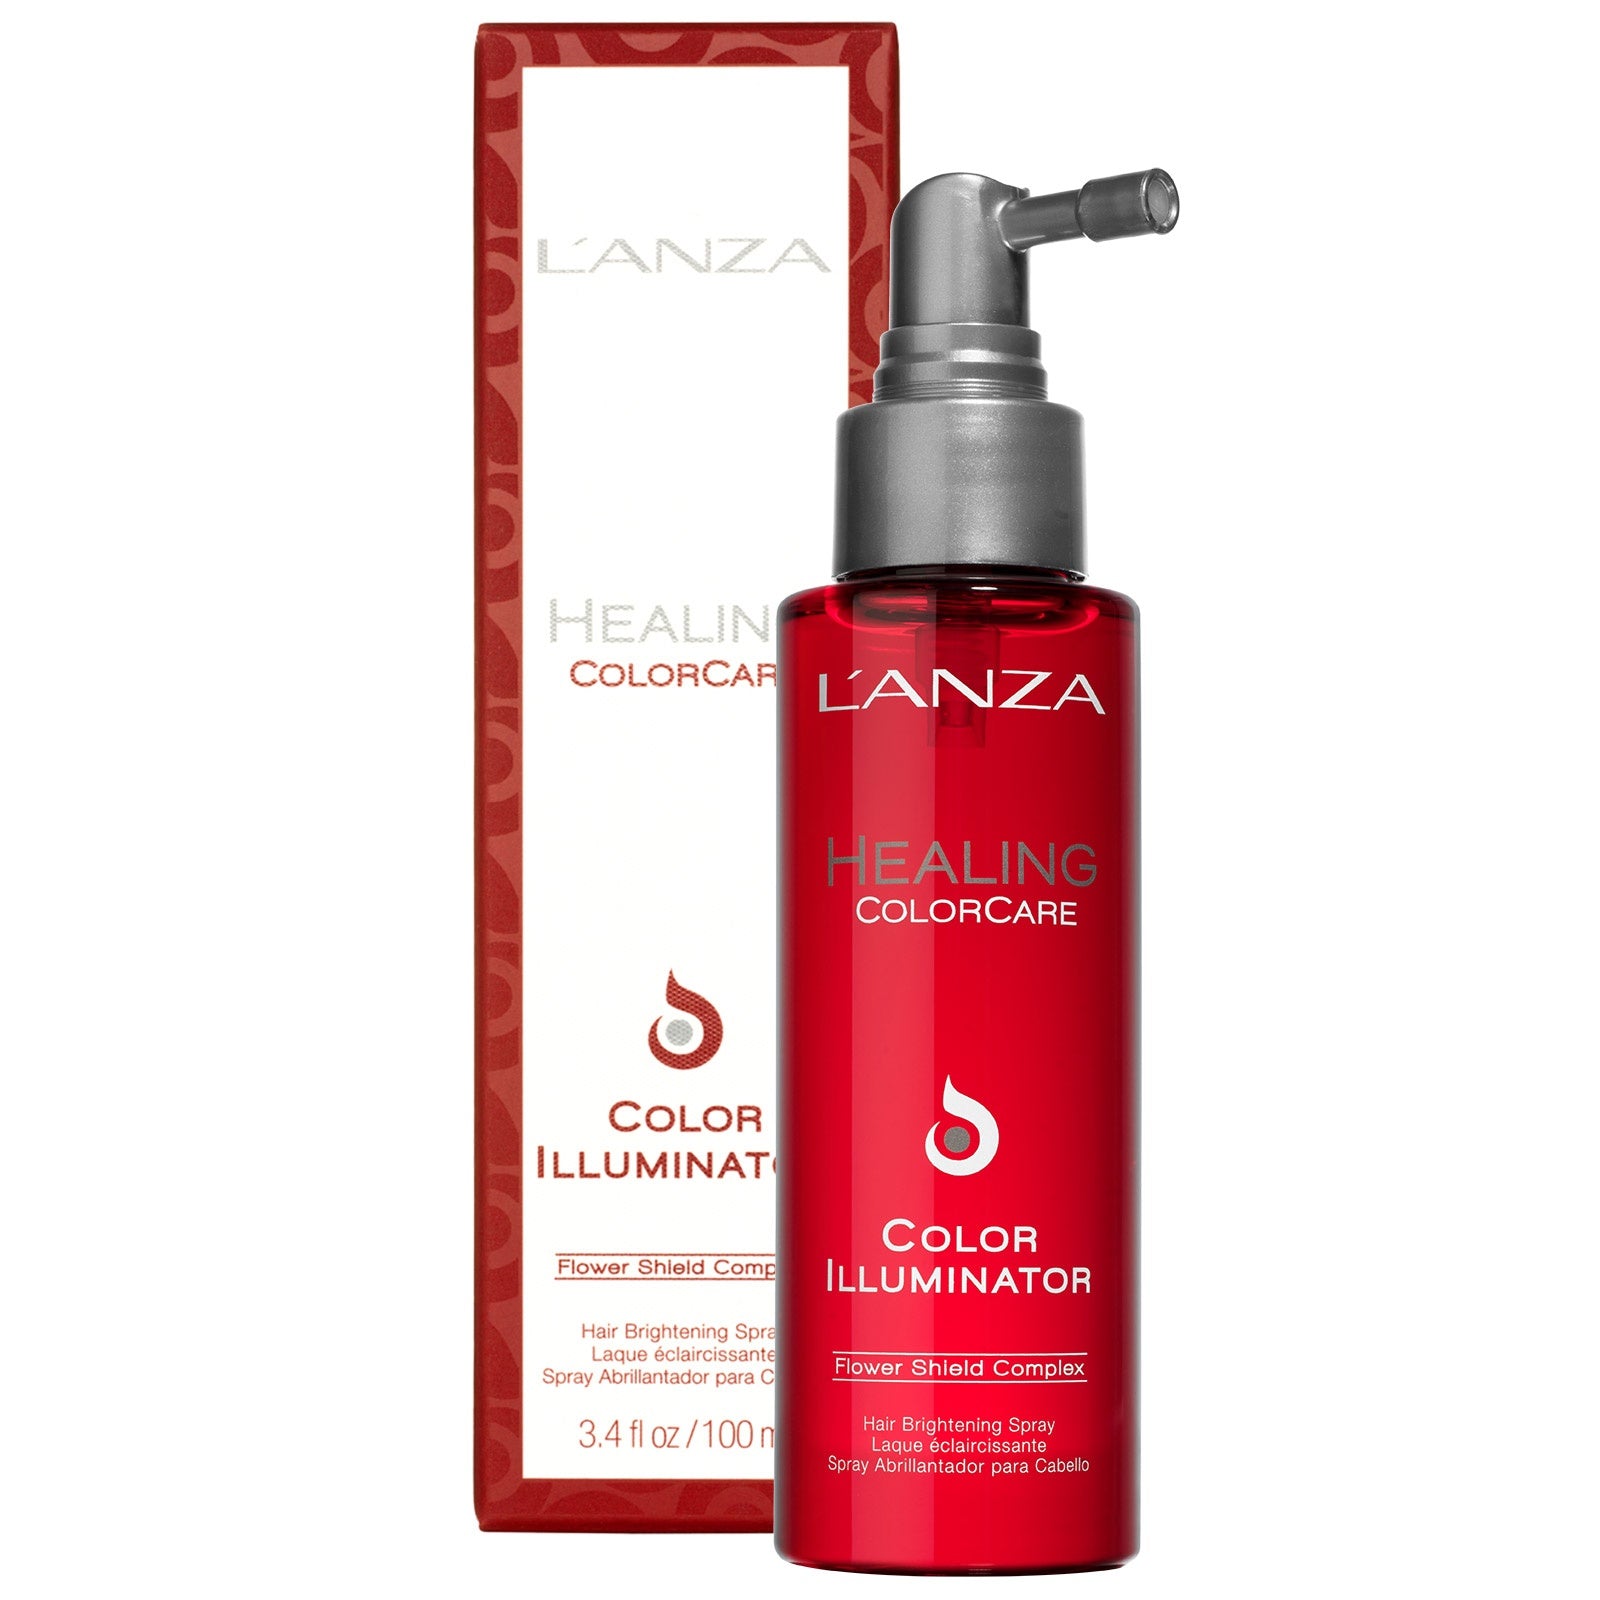 Review, Hairstyle, Haircare Trend 2017, 2018: L’anza Healing Oil Shampoo and Conditioner, Healing ColorCare Color Illuminator